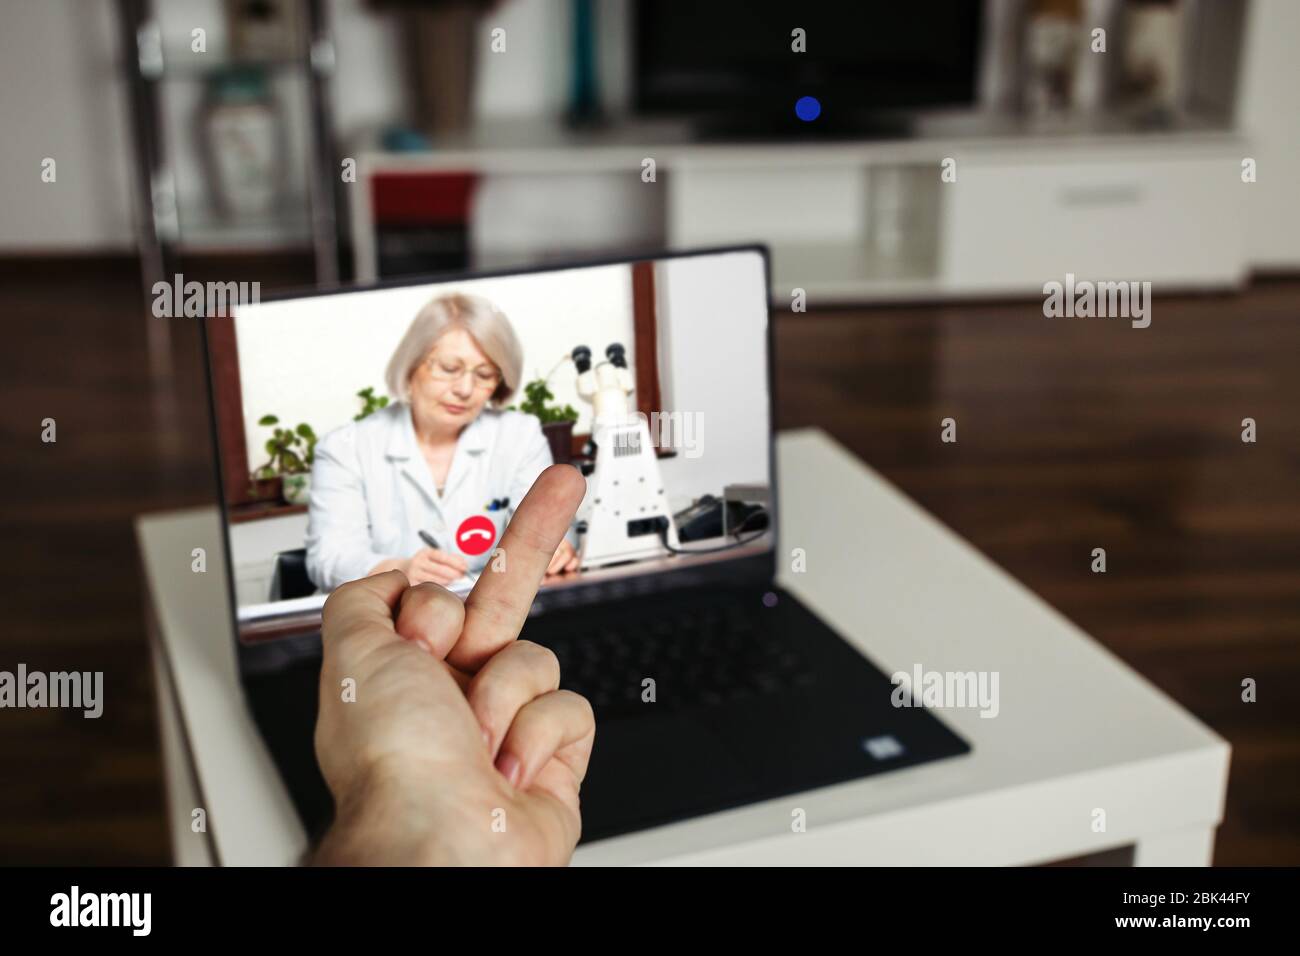 Telemedicine negative concept. Angrey male showing middle finger to a doctor GP on a computer screen, living room home background Stock Photo